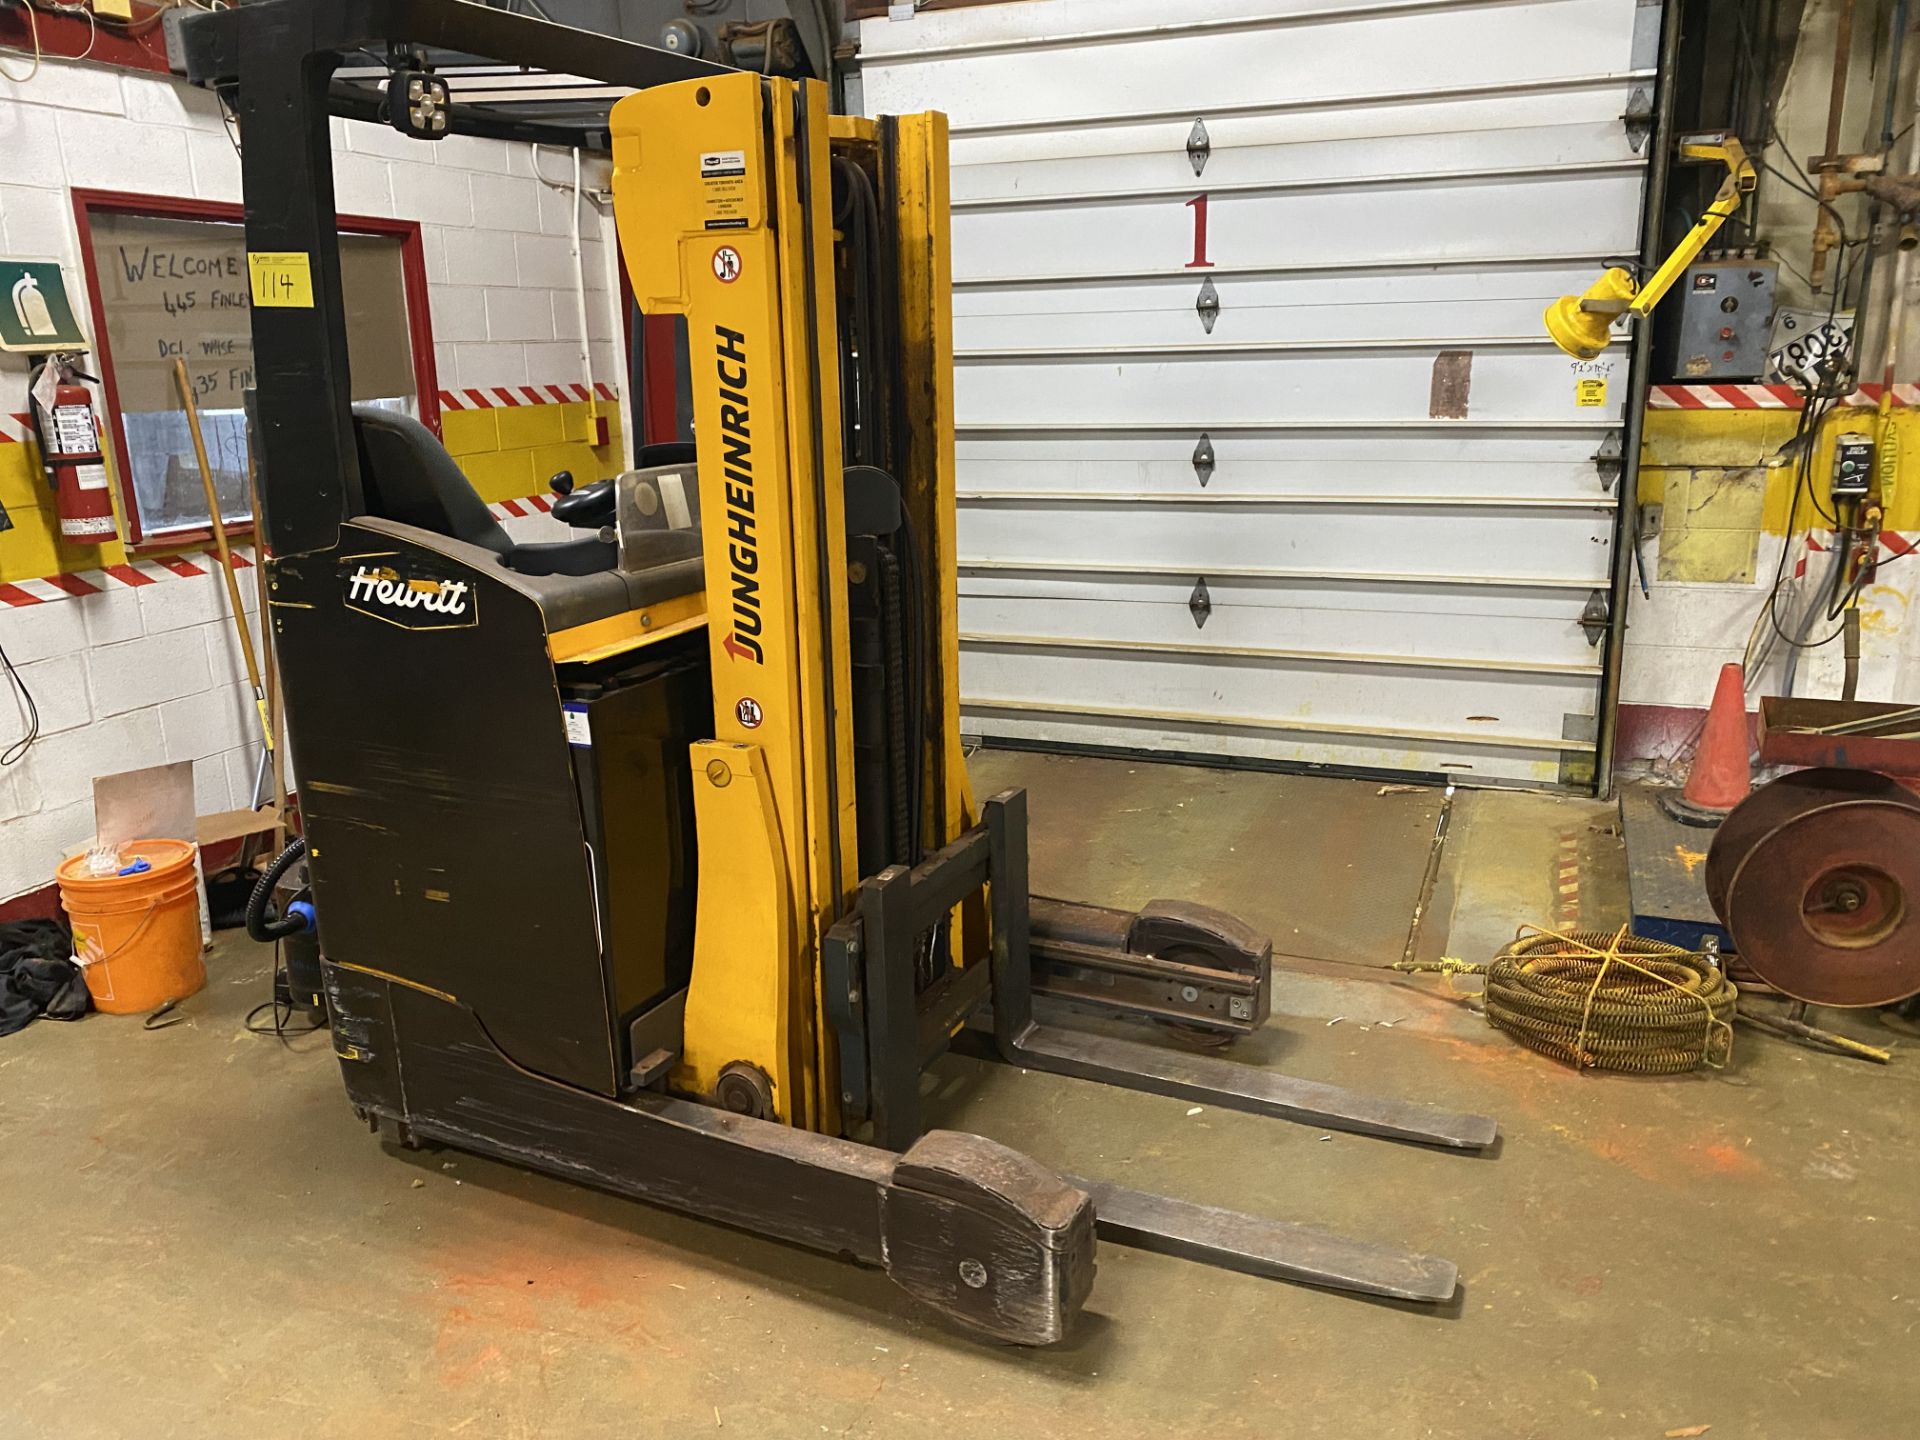 JUNGHEINRICH ELECTRIC REACH TRUCK, 3,000LB CAP., 179" MAX LIFT, 3-STAGE AMST, 24V, S/N 91091030 W/